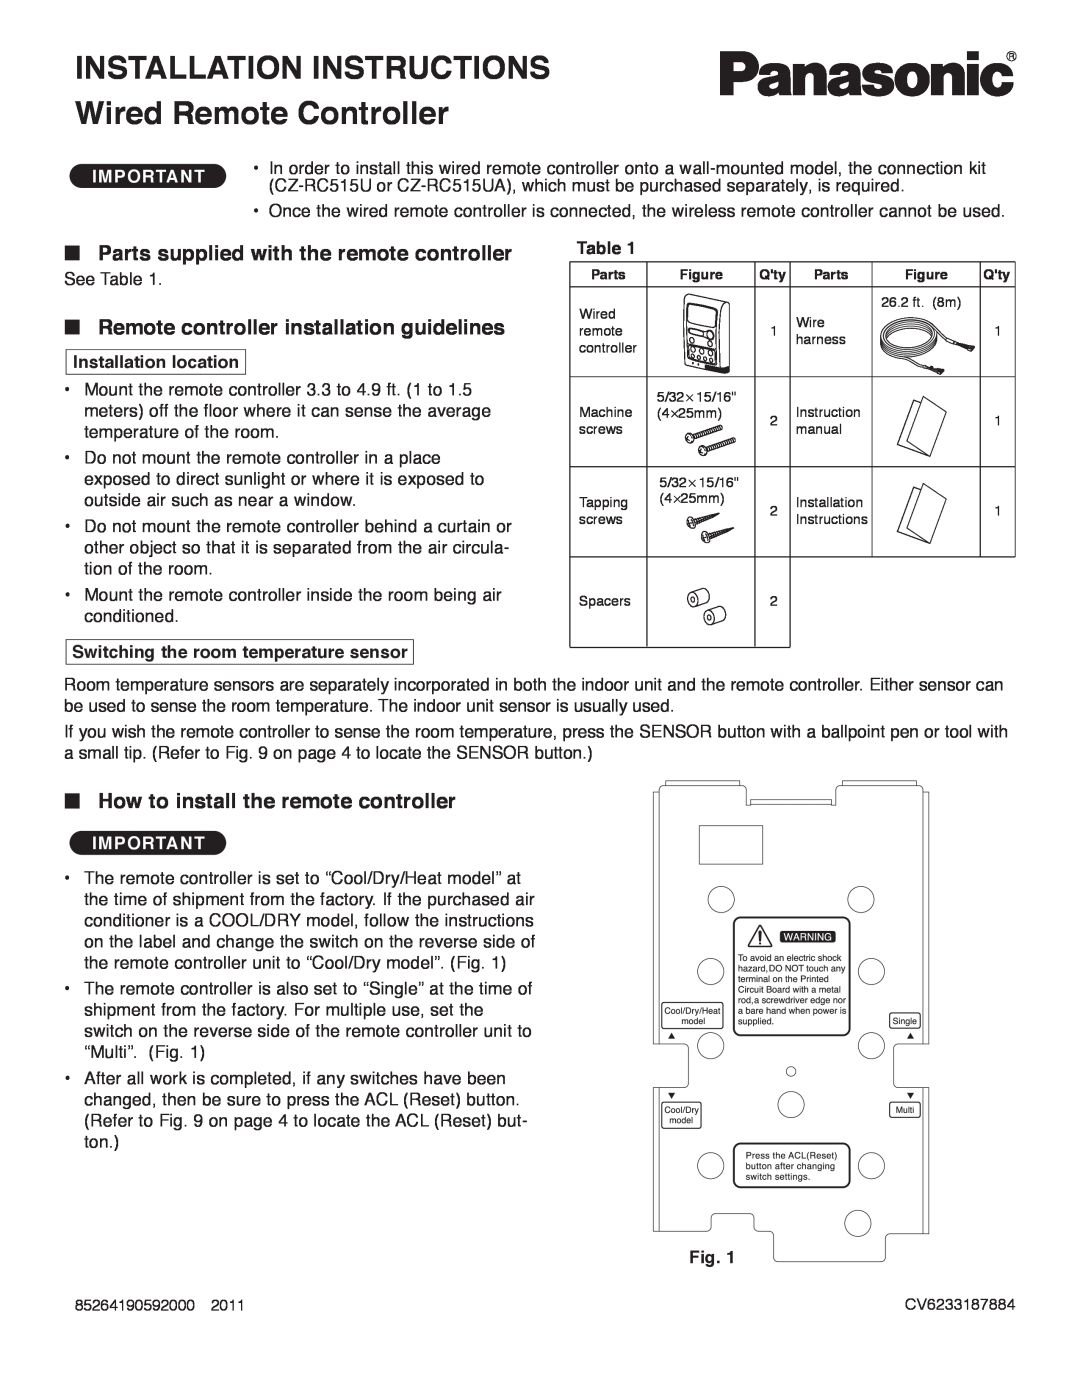 Panasonic CS-KS18B4UW & CZ-18BT1U INSTALLATION INSTRUCTIONS Wired Remote Controller, How to install the remote controller 